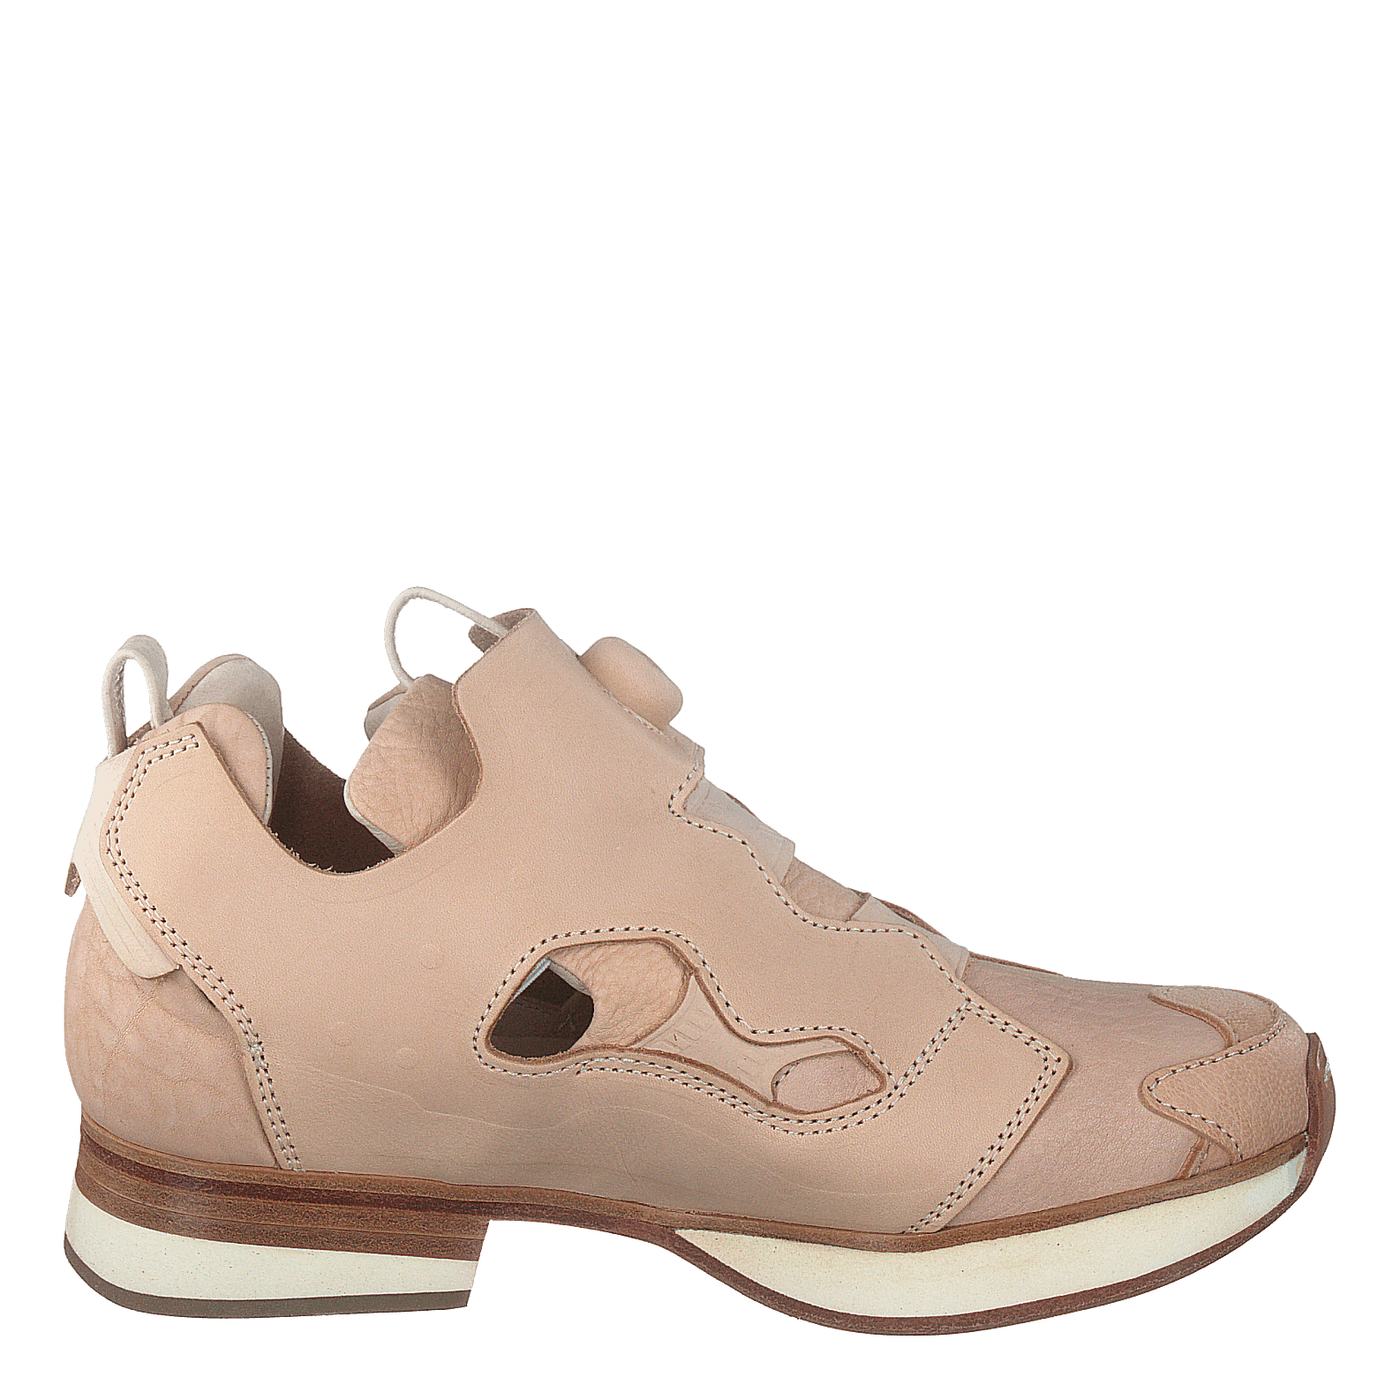 Manual Industrial Products 15 Khaki